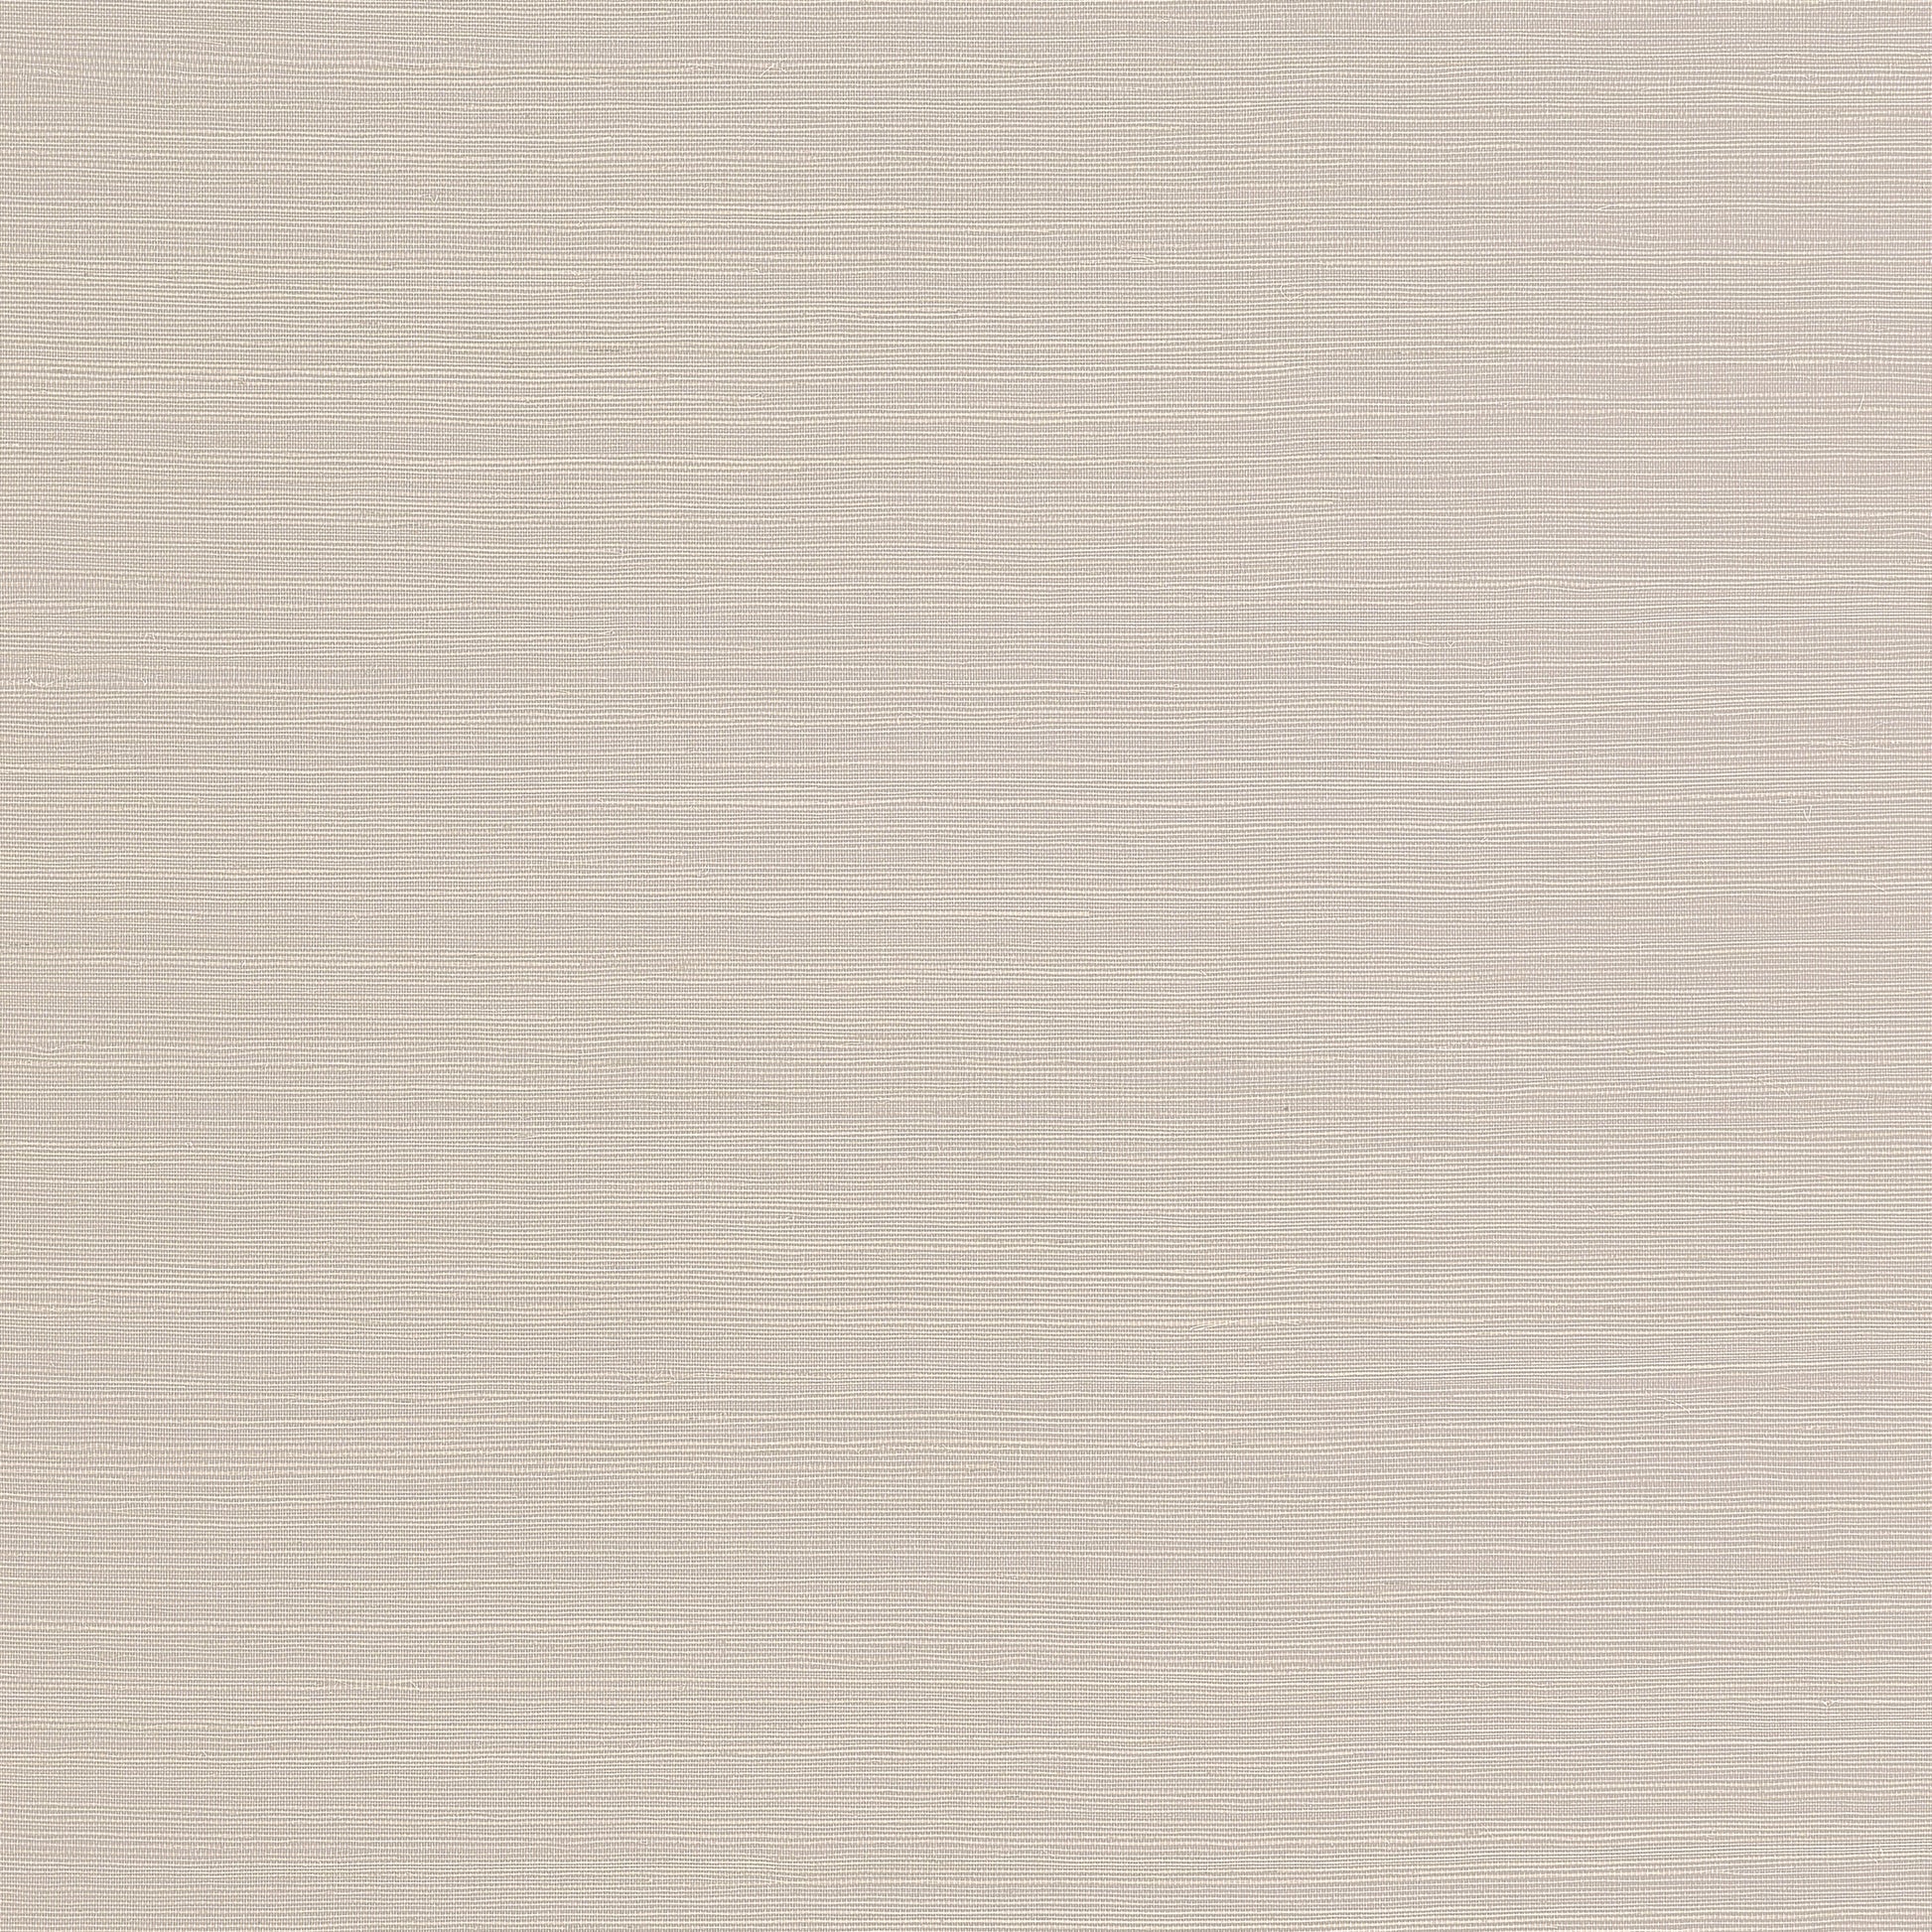 Purchase Thibaut Wallpaper Product# T19645 pattern name Heather Sisal color Tan. 